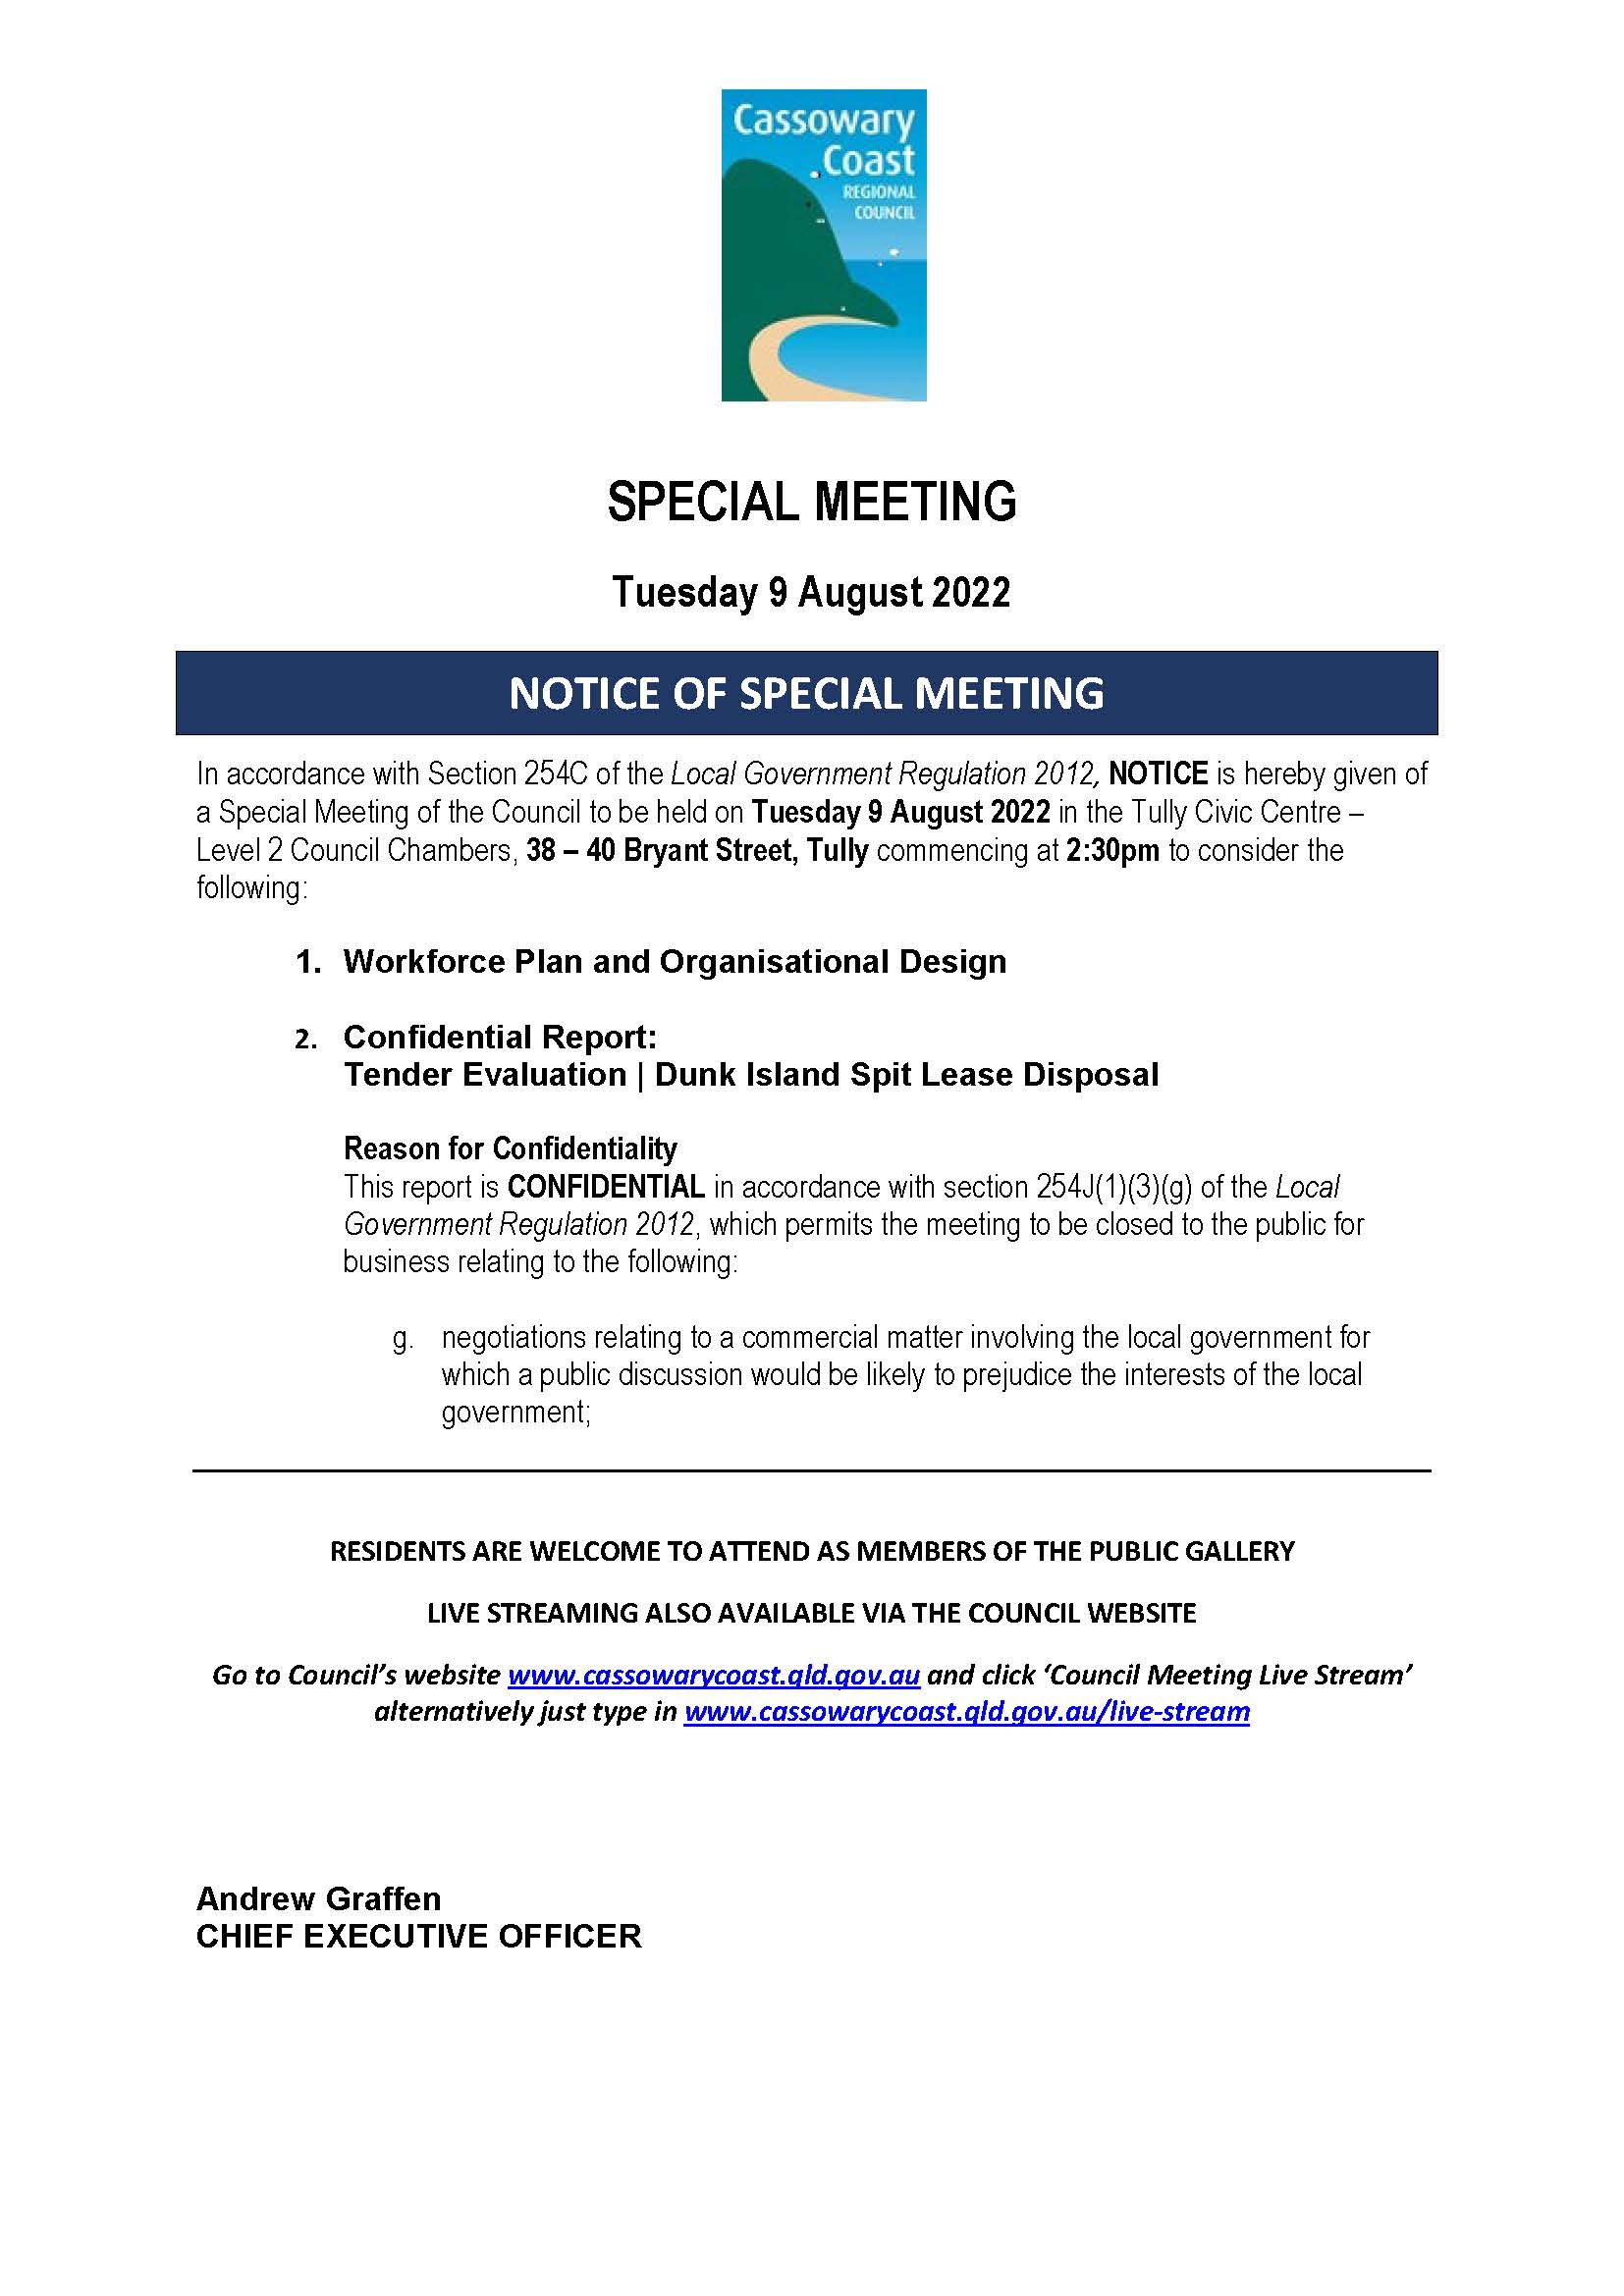 20220809 Notice of special meeting